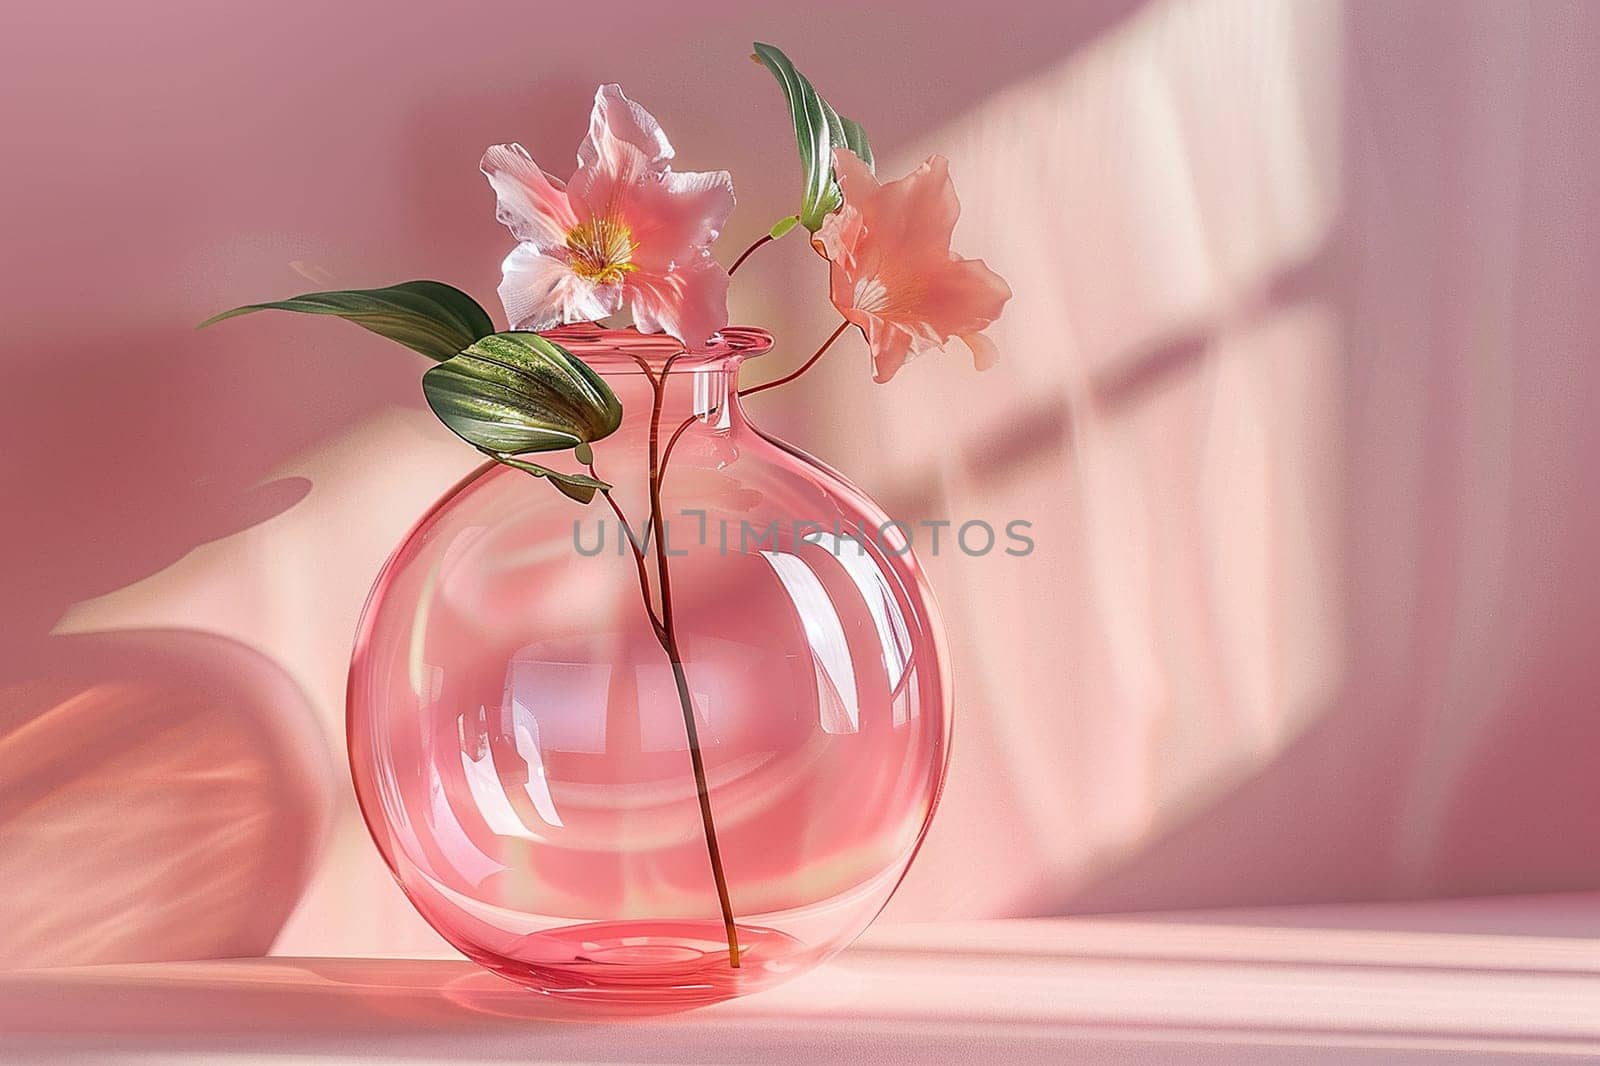 A glass vase with a branch of flowers near a peach-colored wall with shadows from the sun. Glass interior design element.